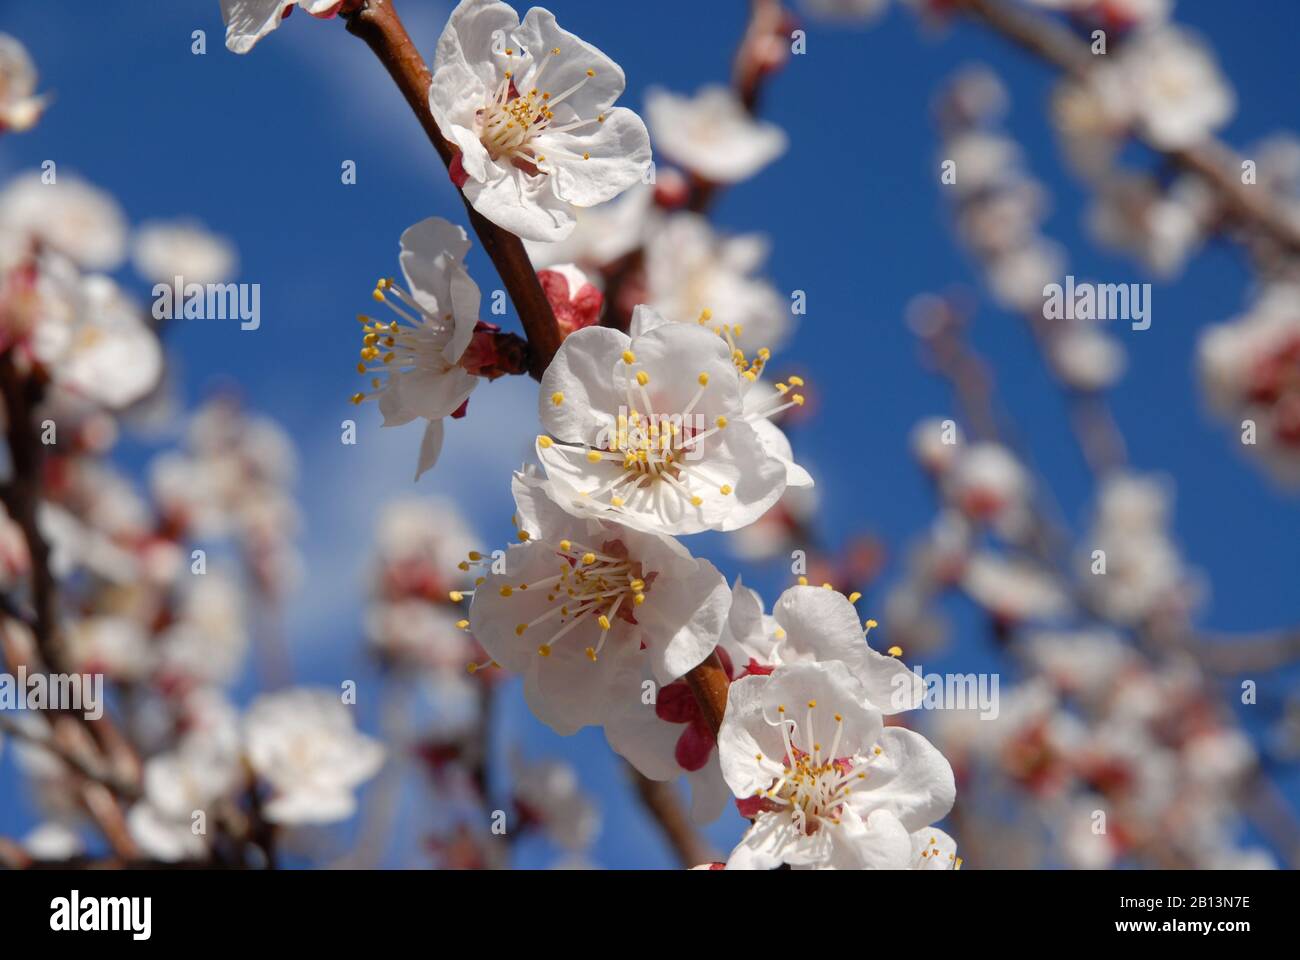 Apricot blossom on tree against blue sky Stock Photo